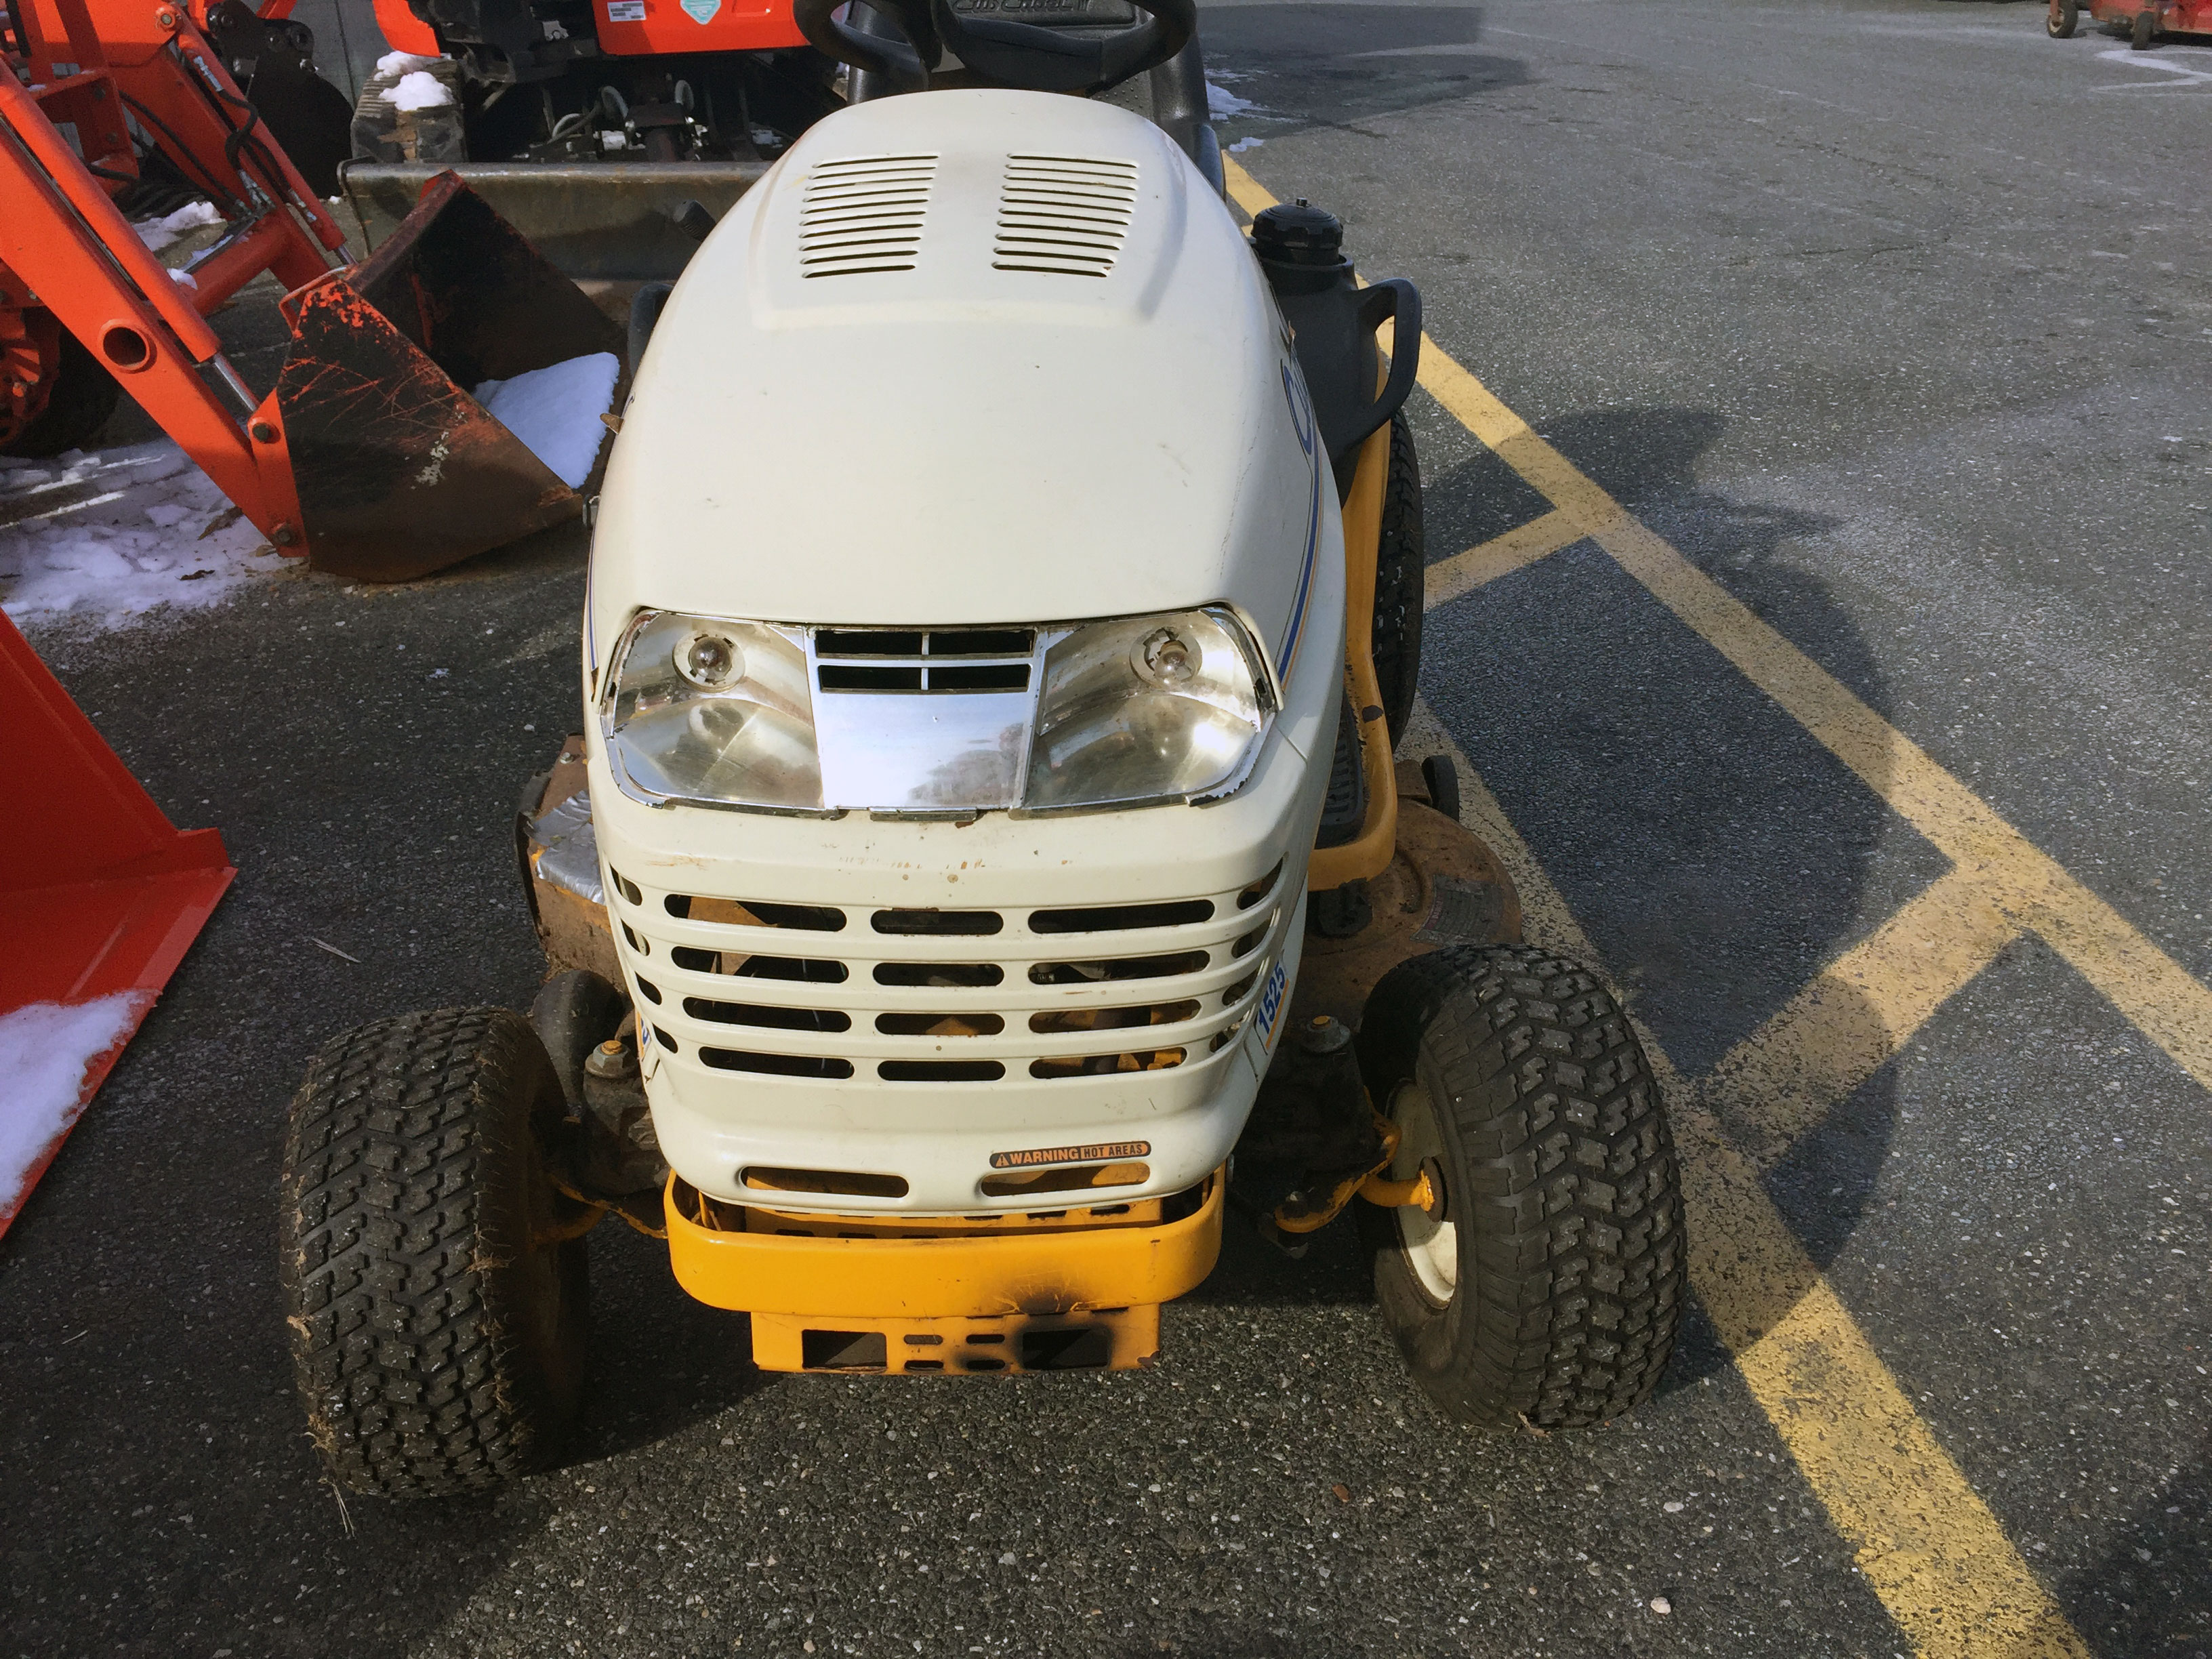 Used 2003 Cub Cadet 1525 For Sale in Harford County